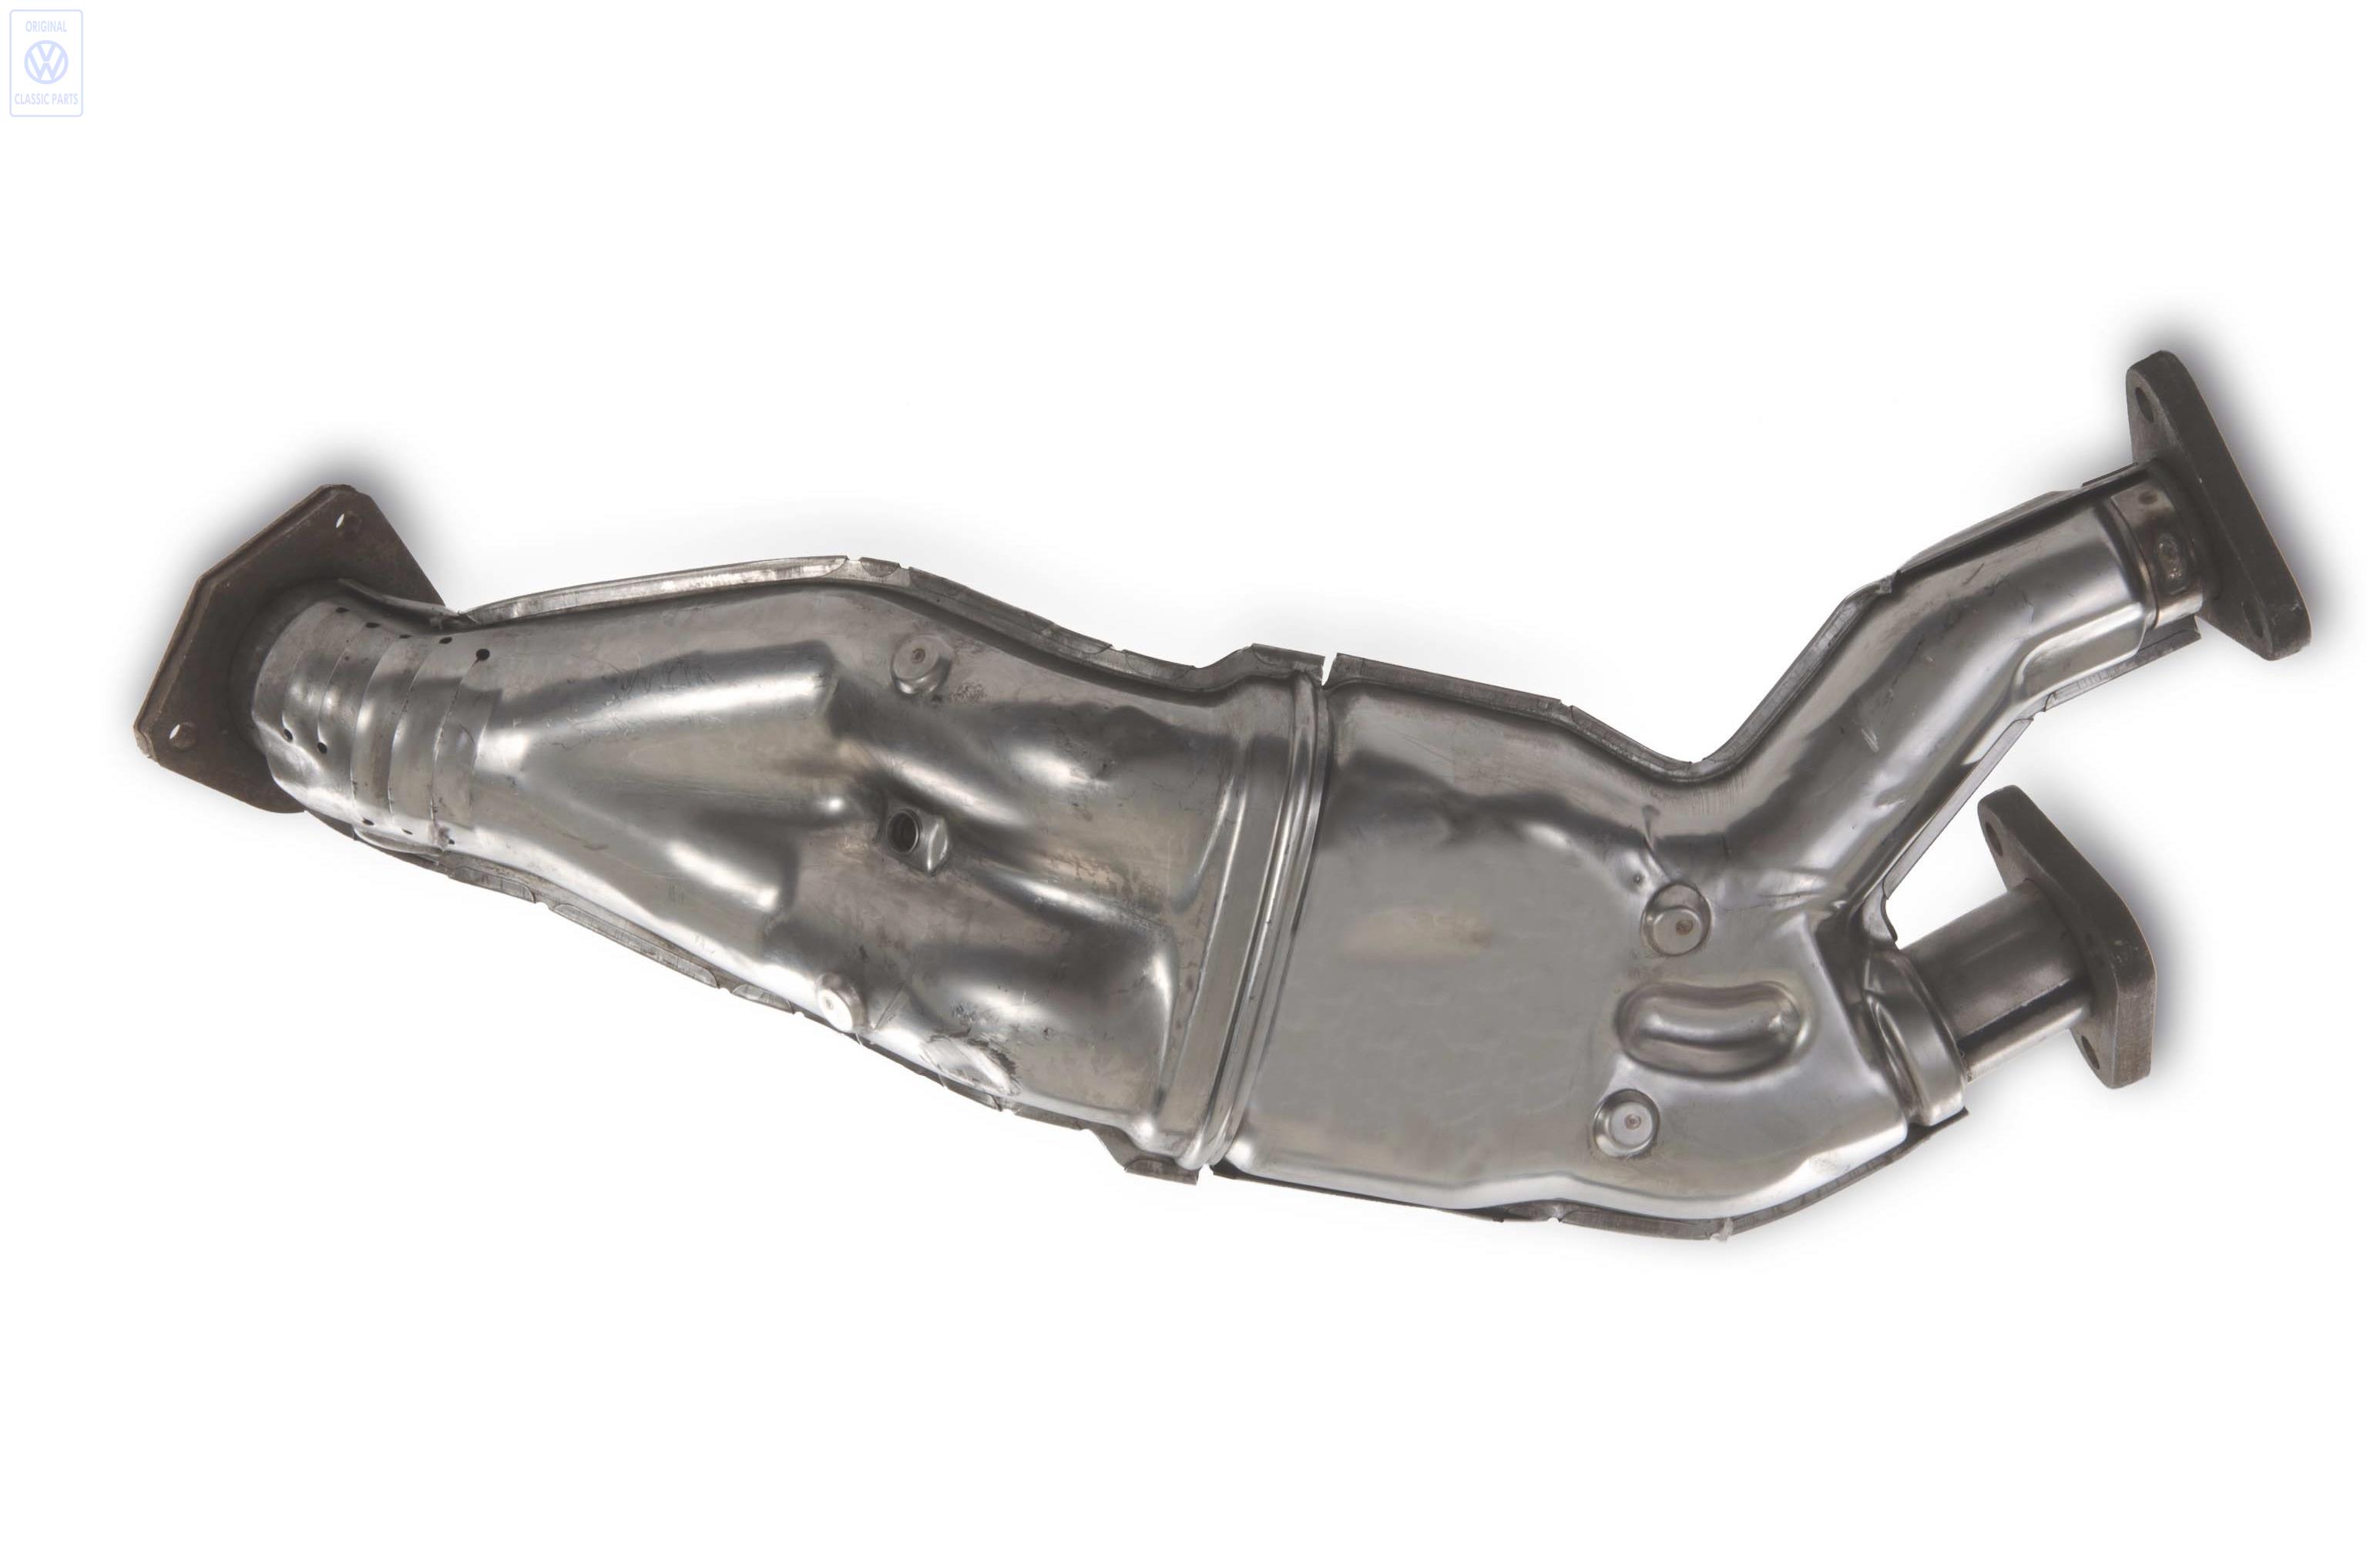 Exhaust pipe for VW Passat VR6